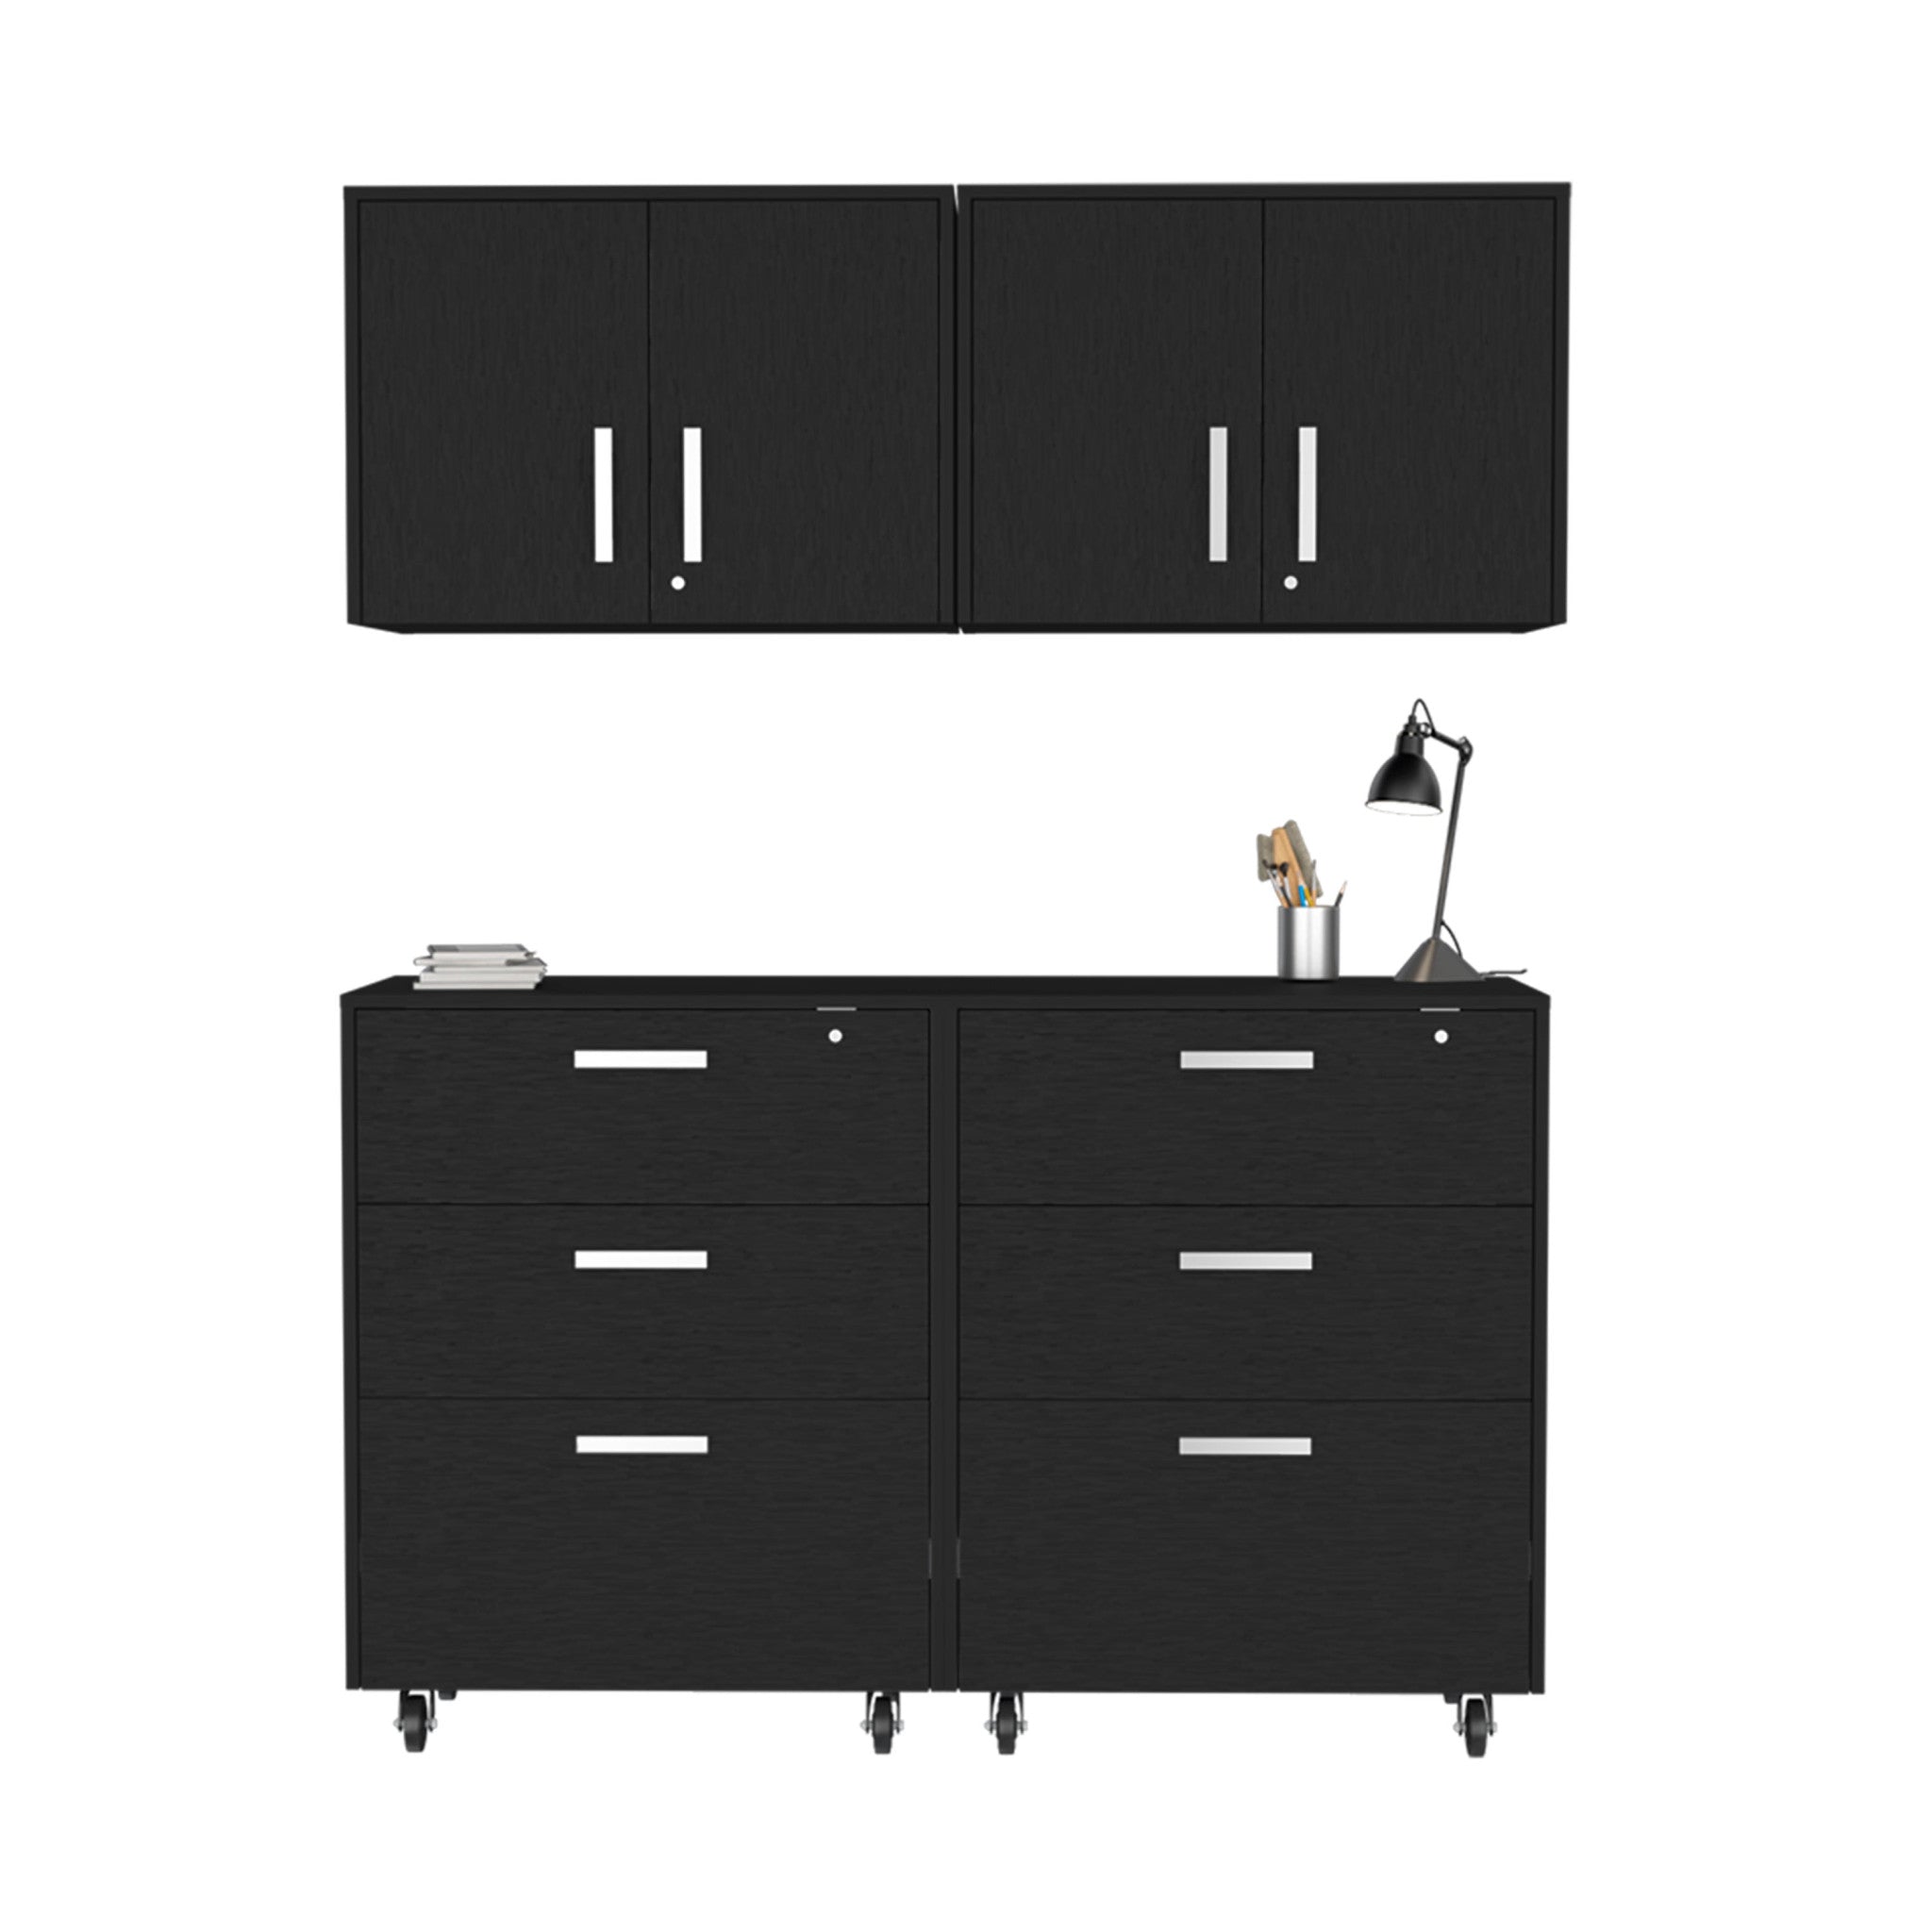 28" Black Wall mounted Accent Cabinet With Four Shelves And Six Drawers